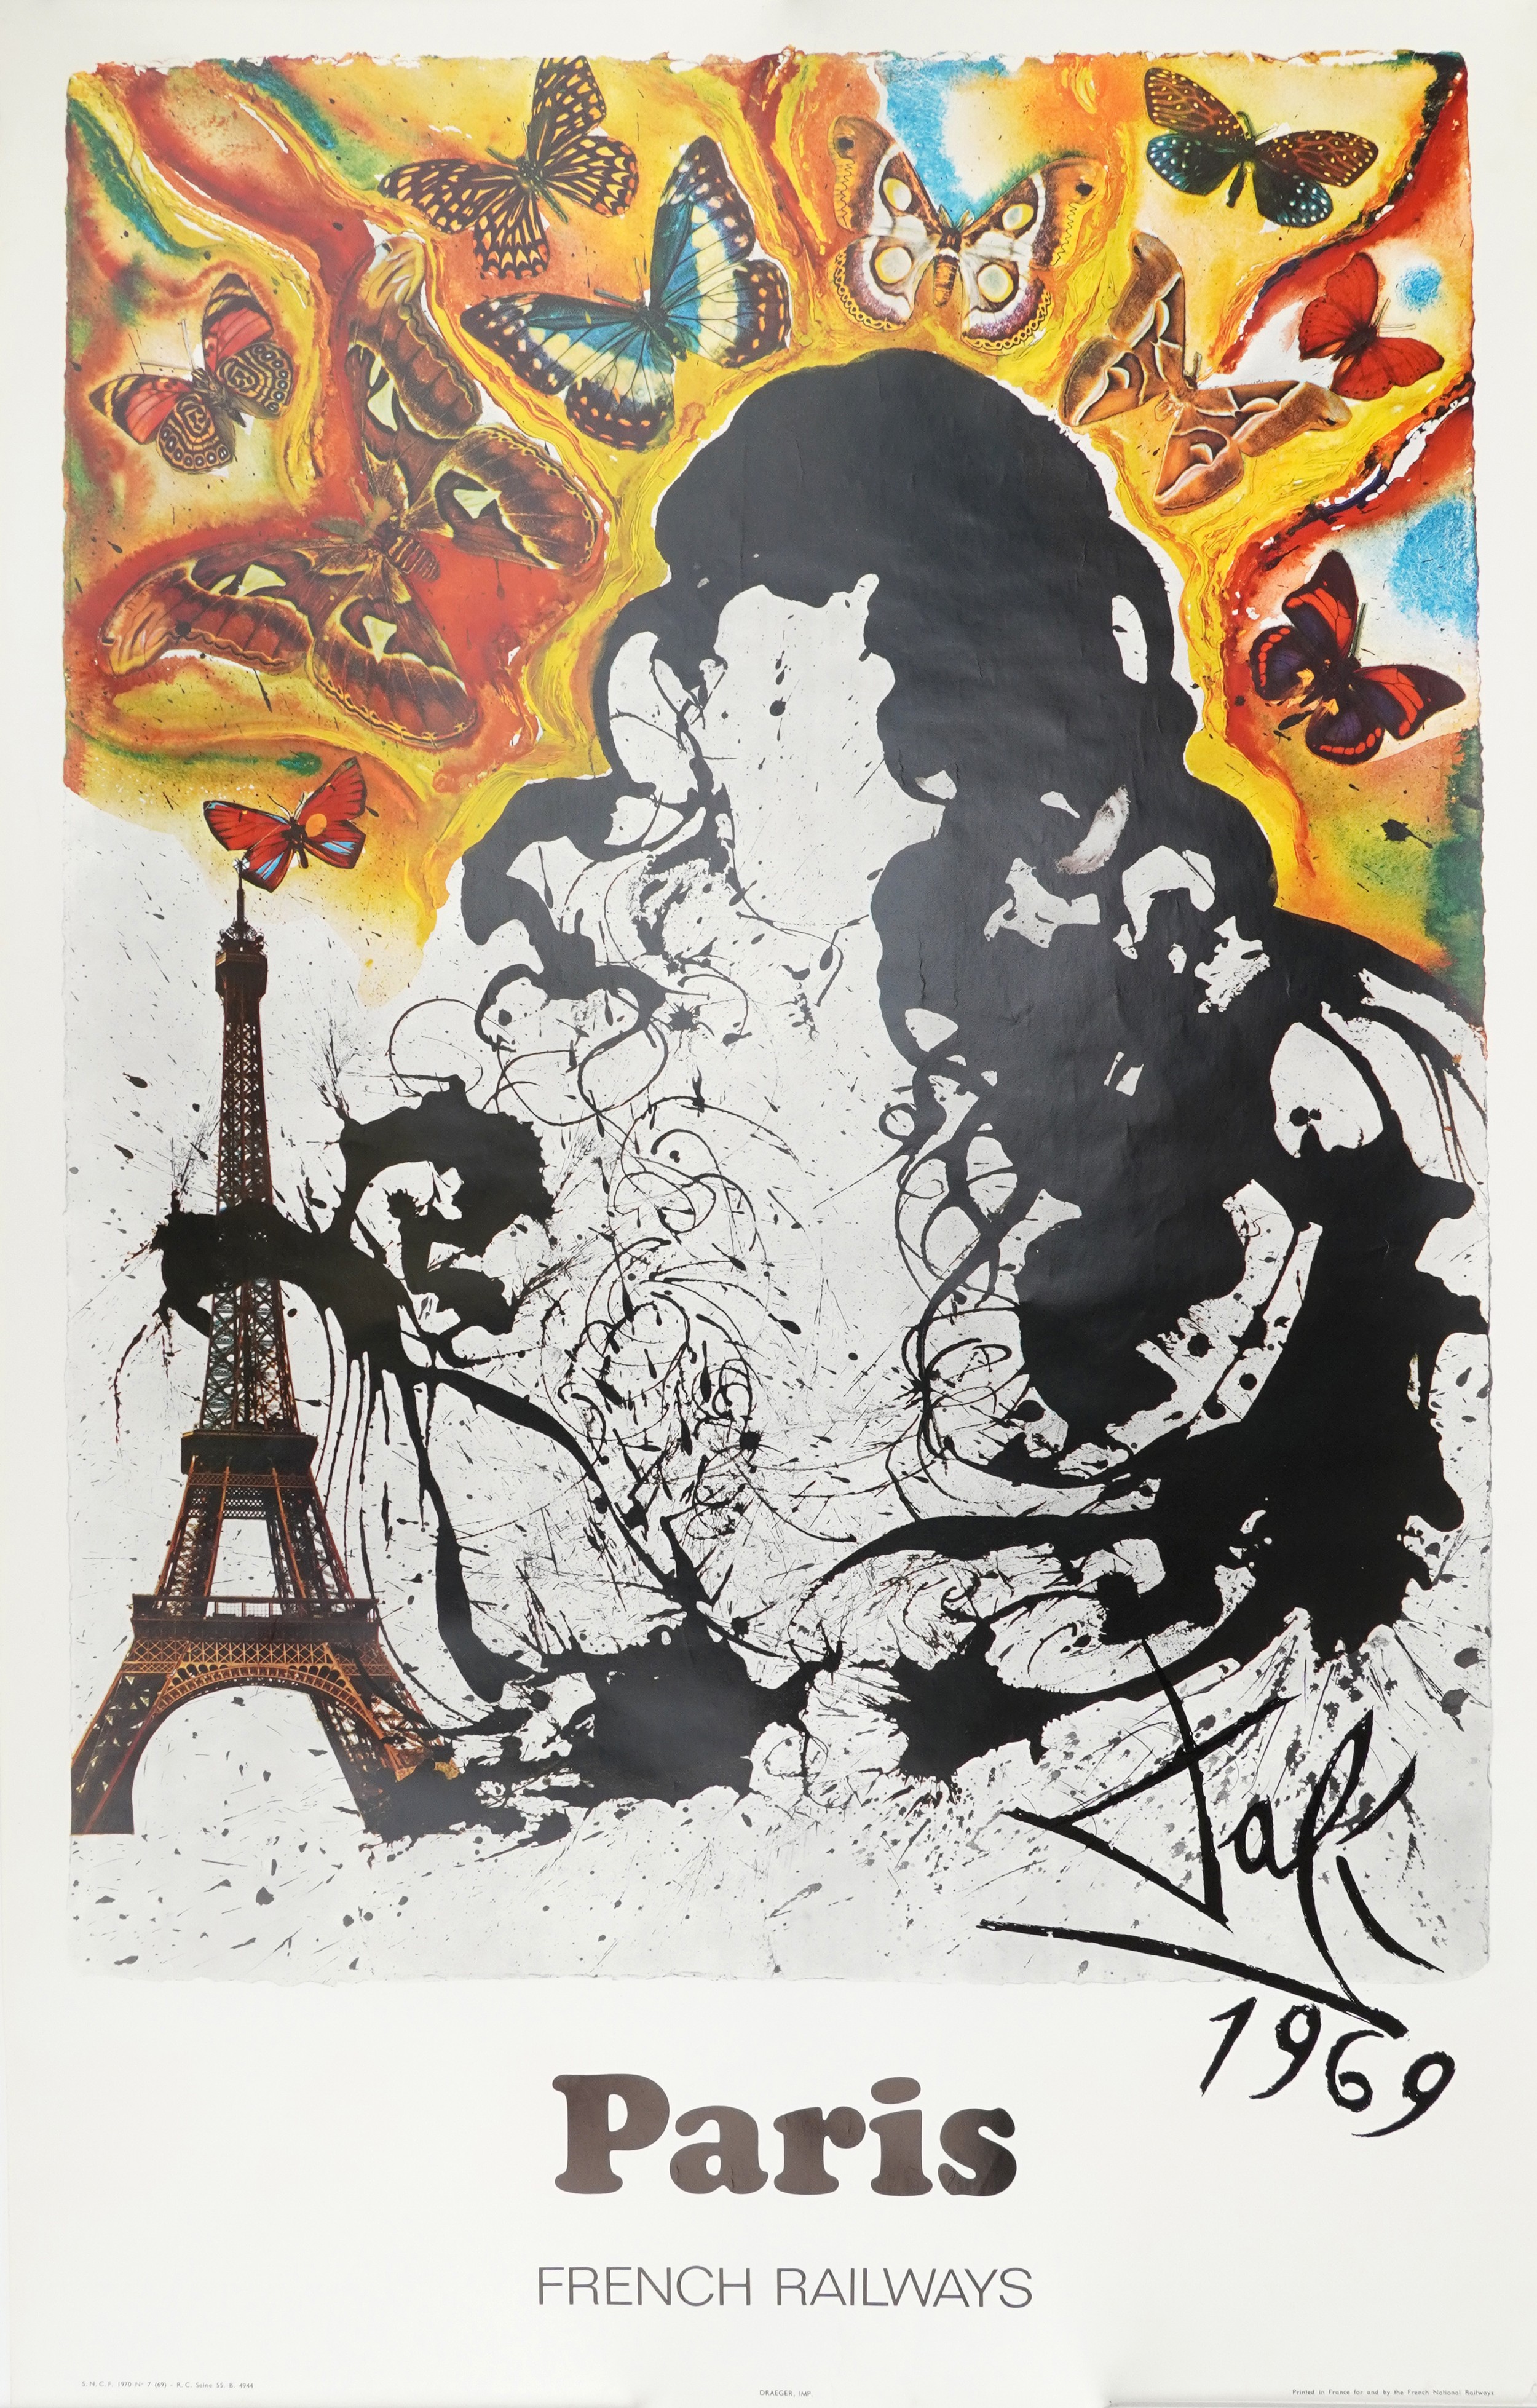 Vintage French Railways Paris travel poster designed by Salvador Dali printed in France, for and